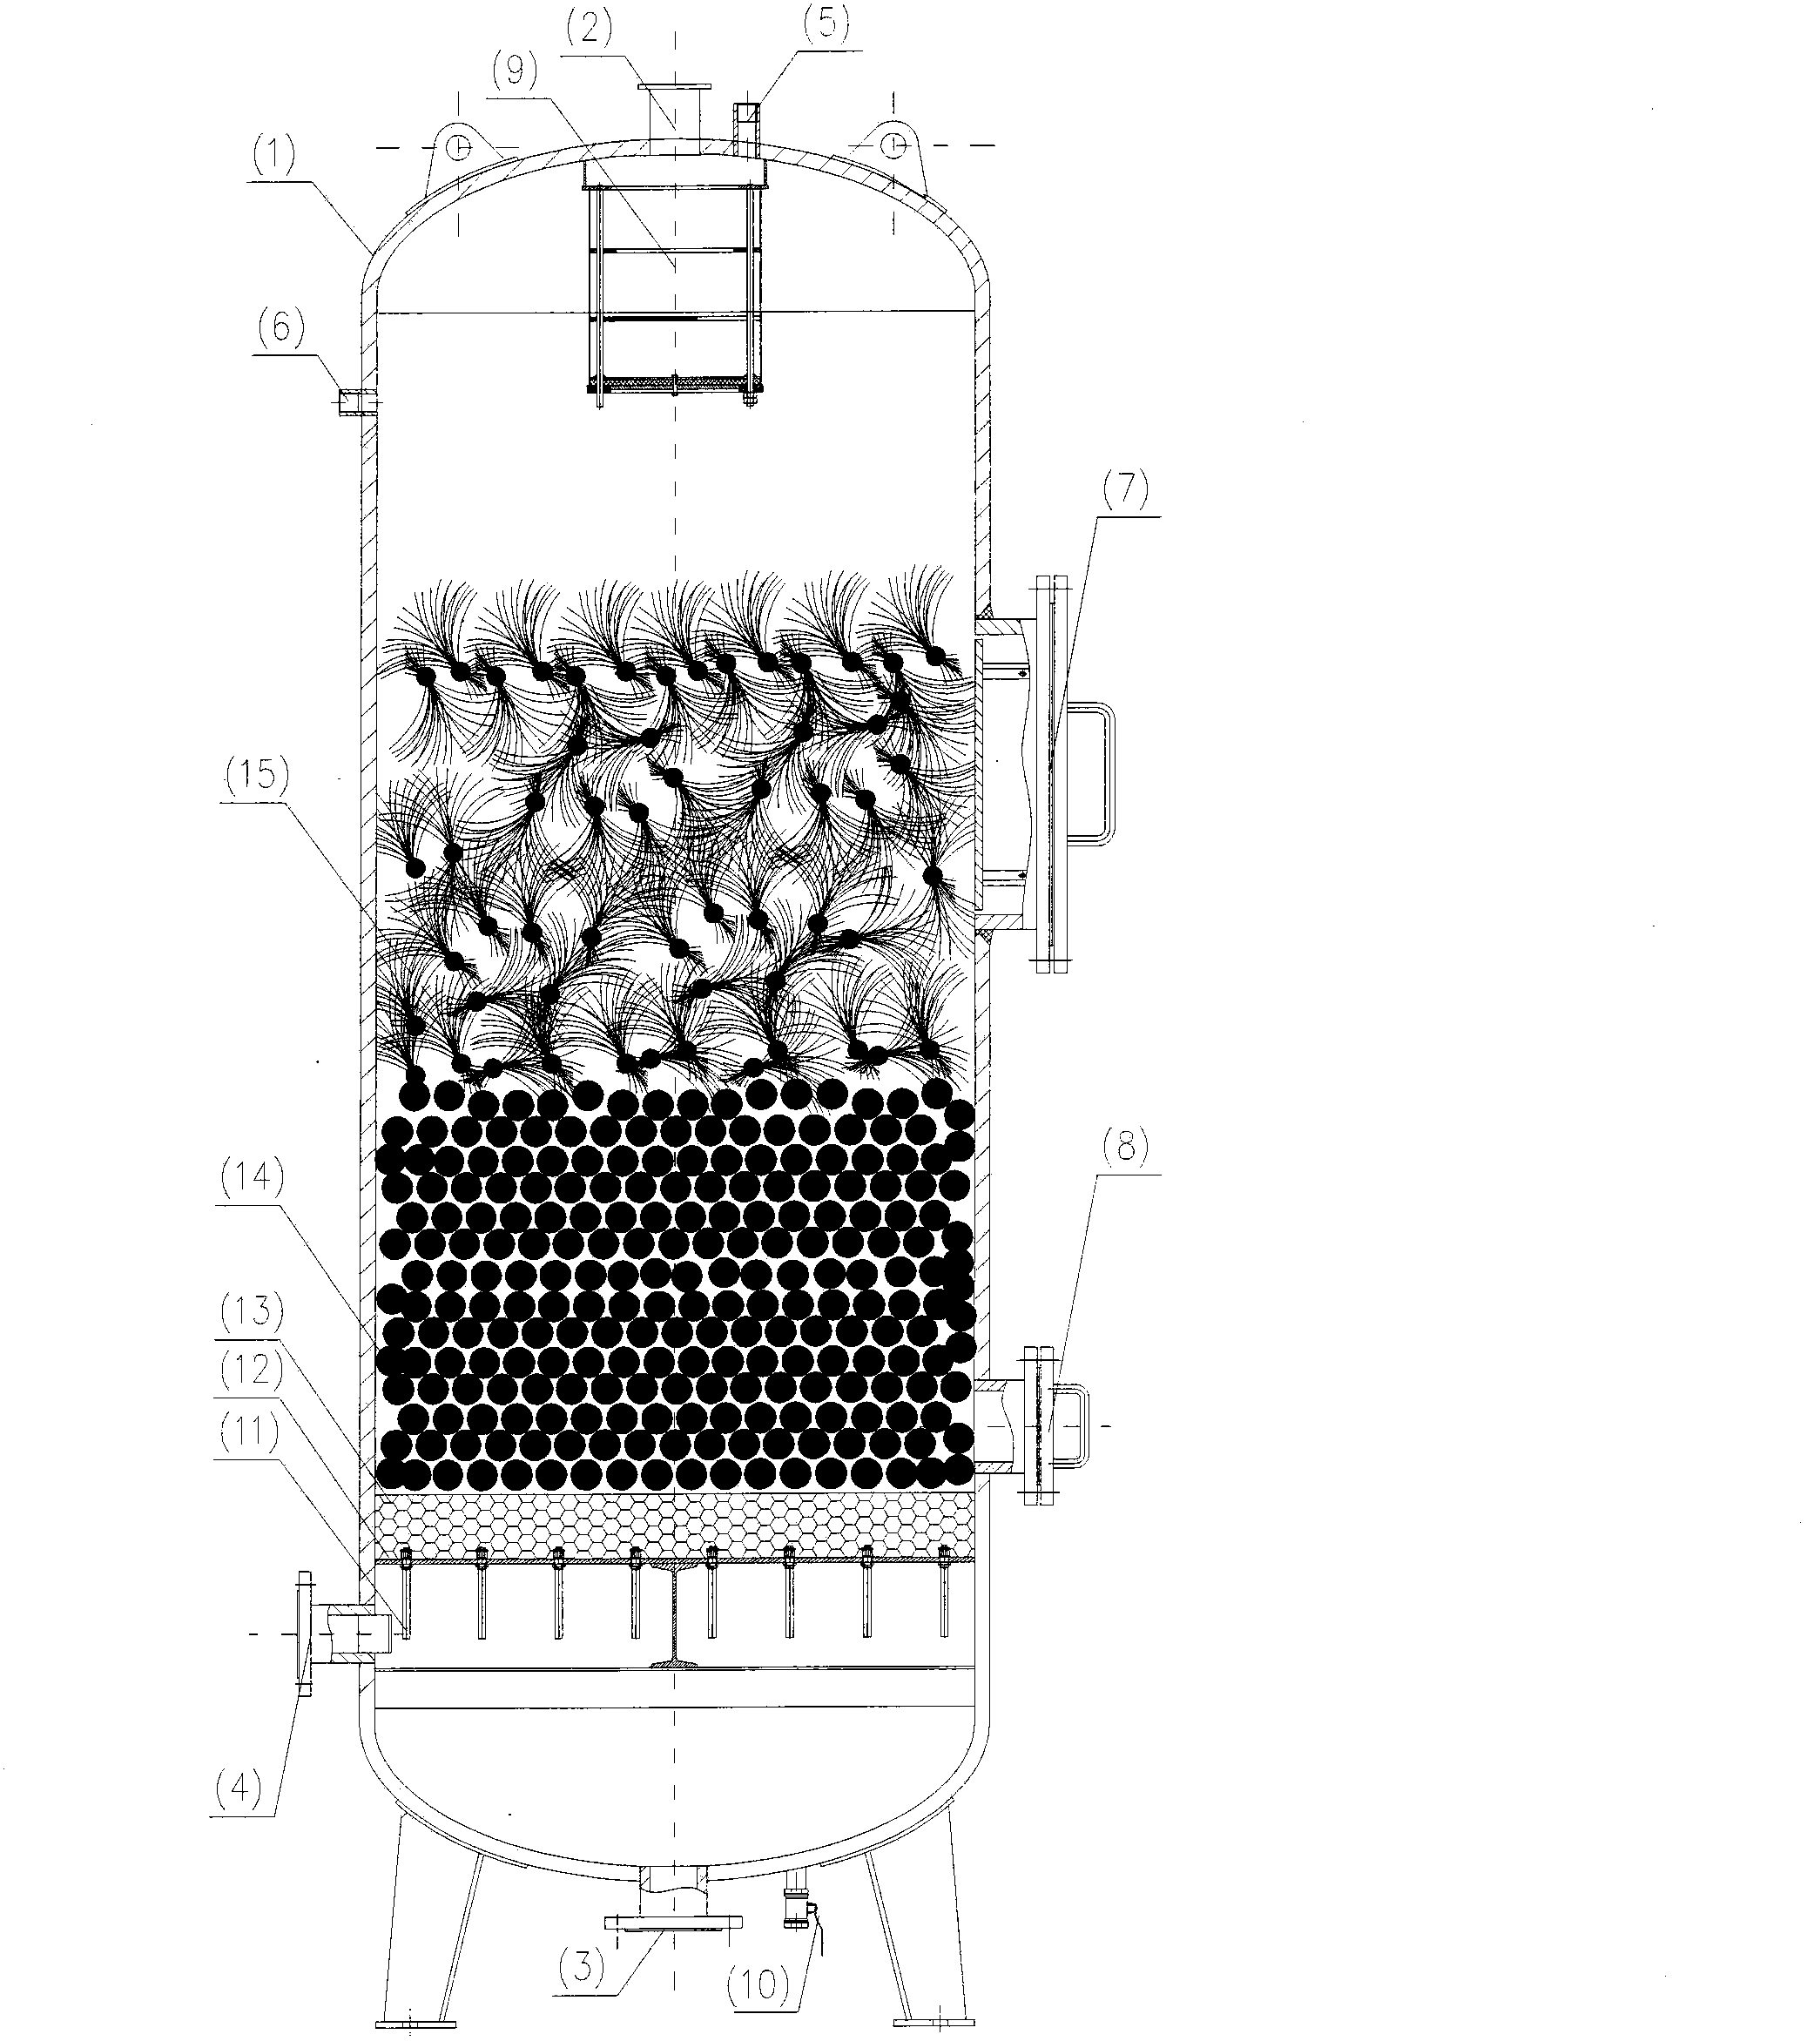 Combined packer filtering device